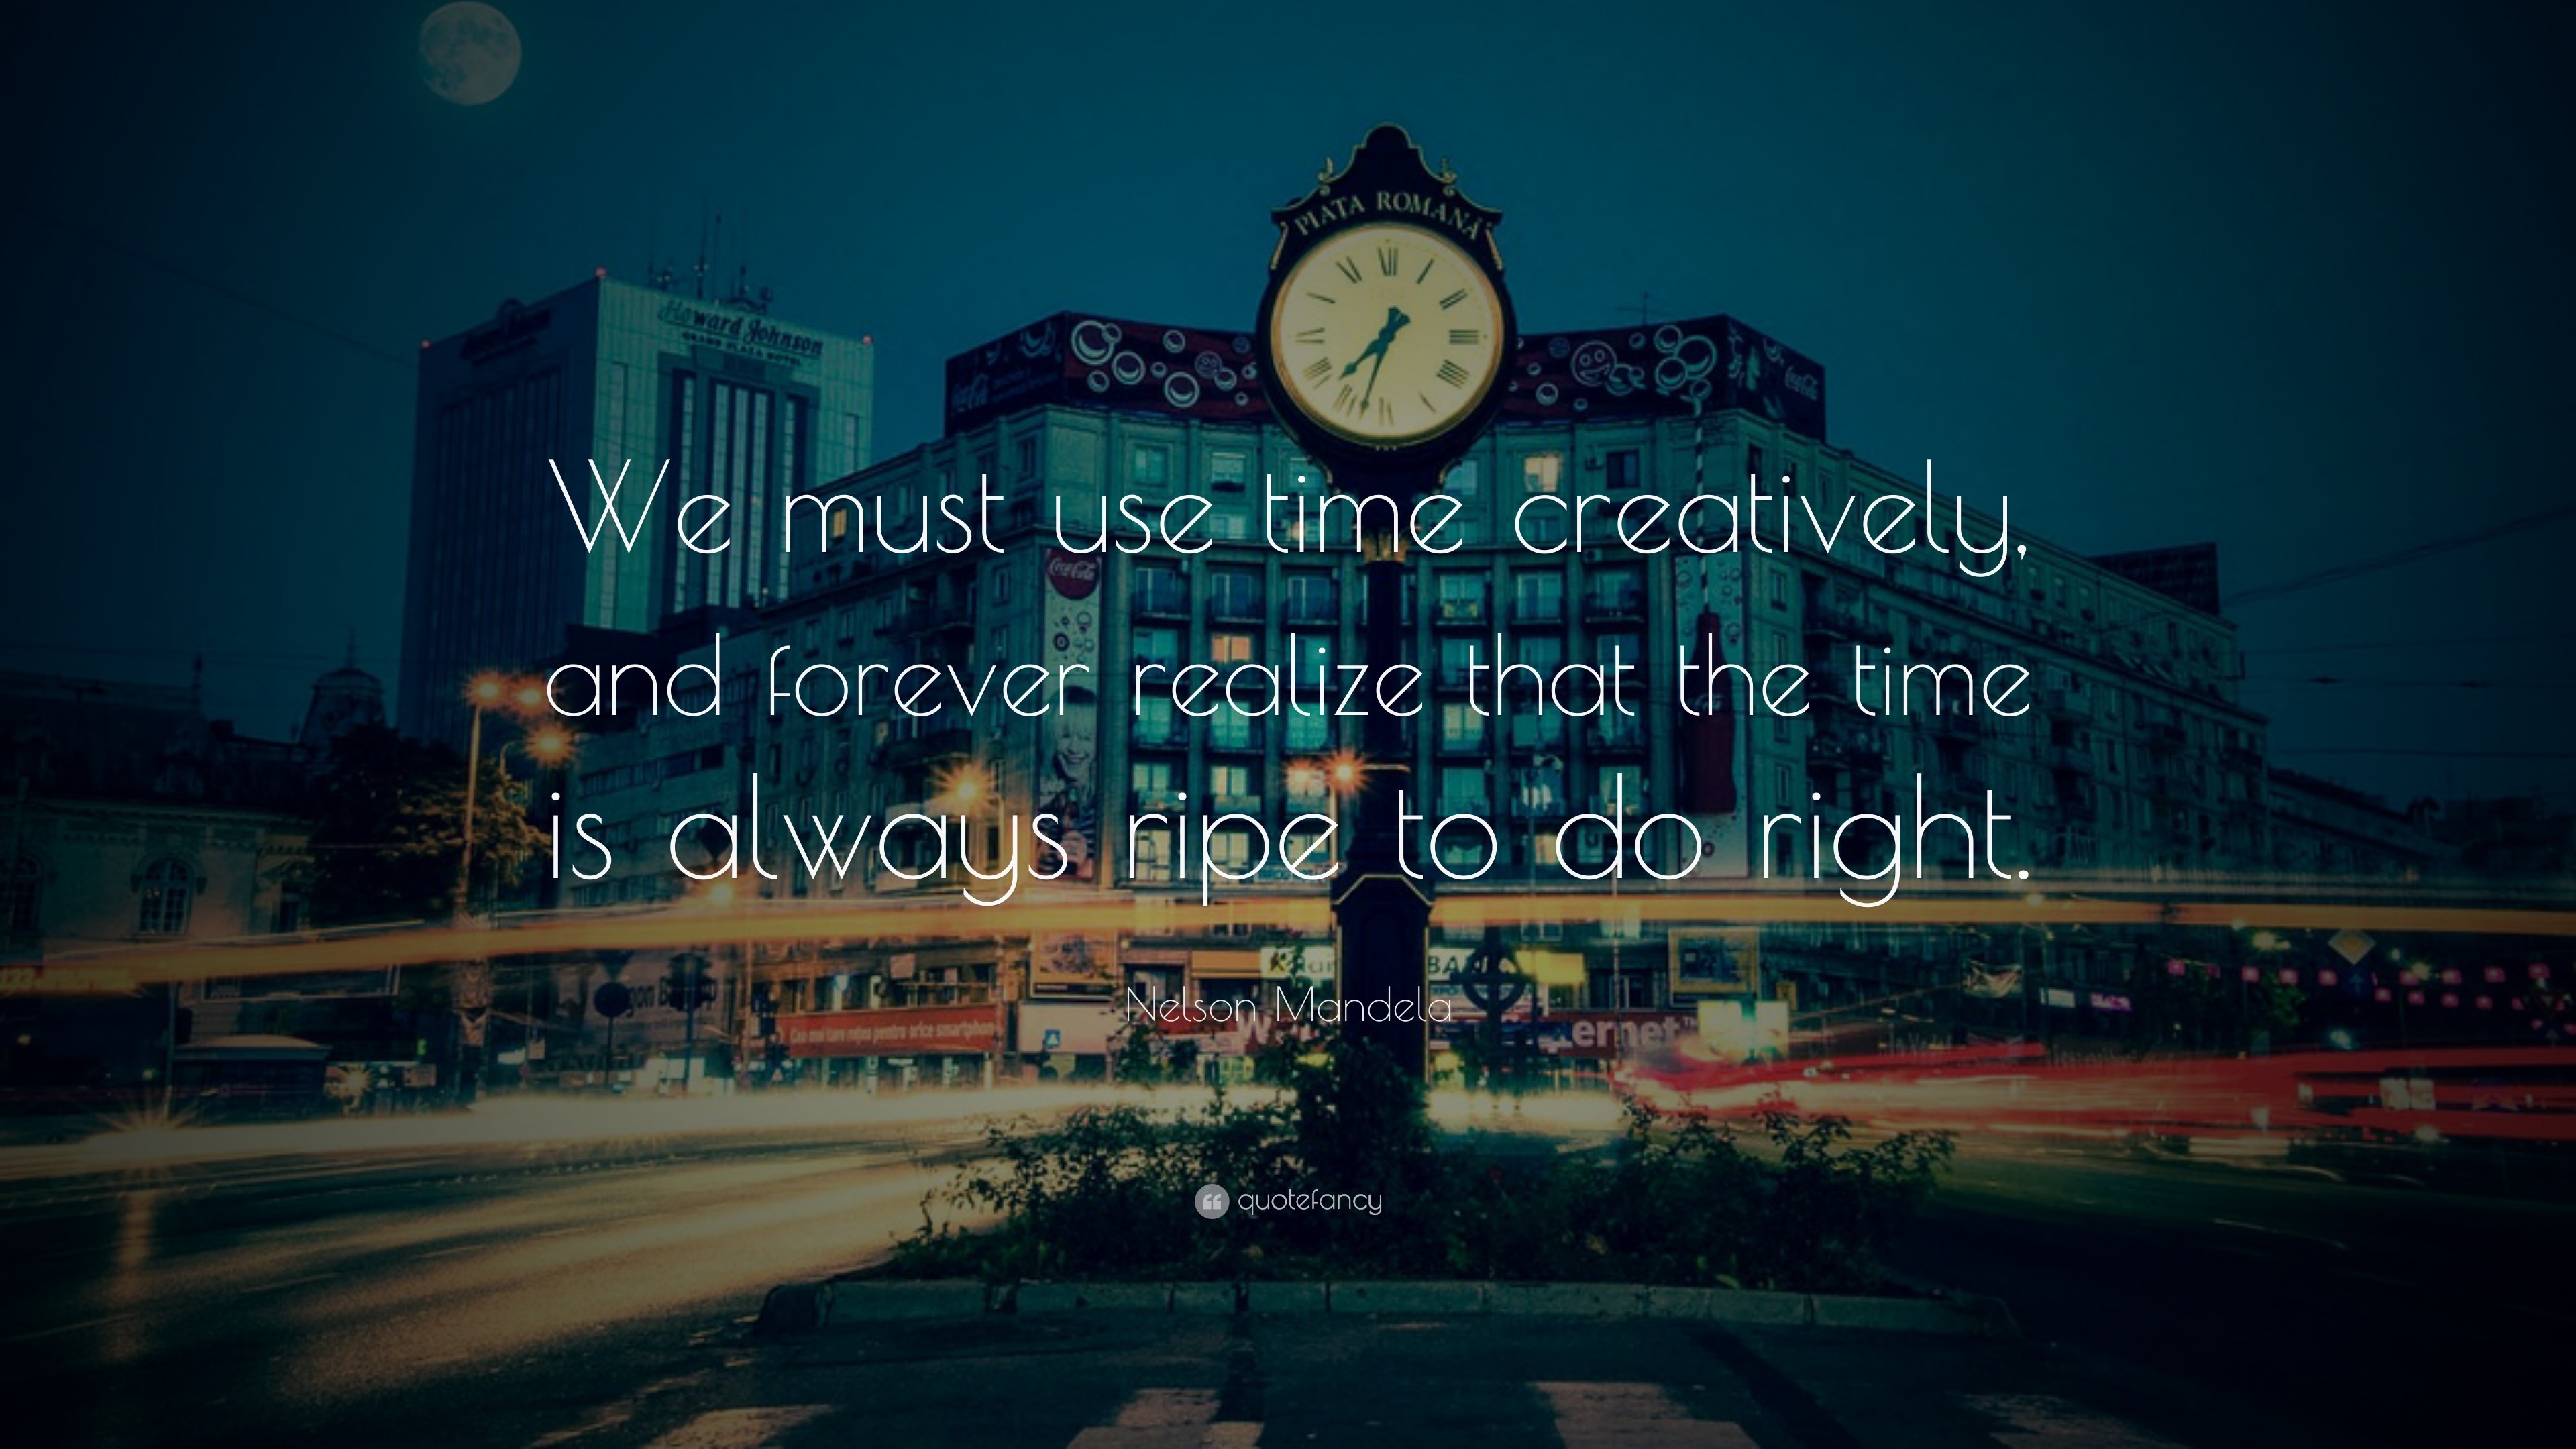 Nelson Mandela Quote: “We must use time creatively, and forever realize